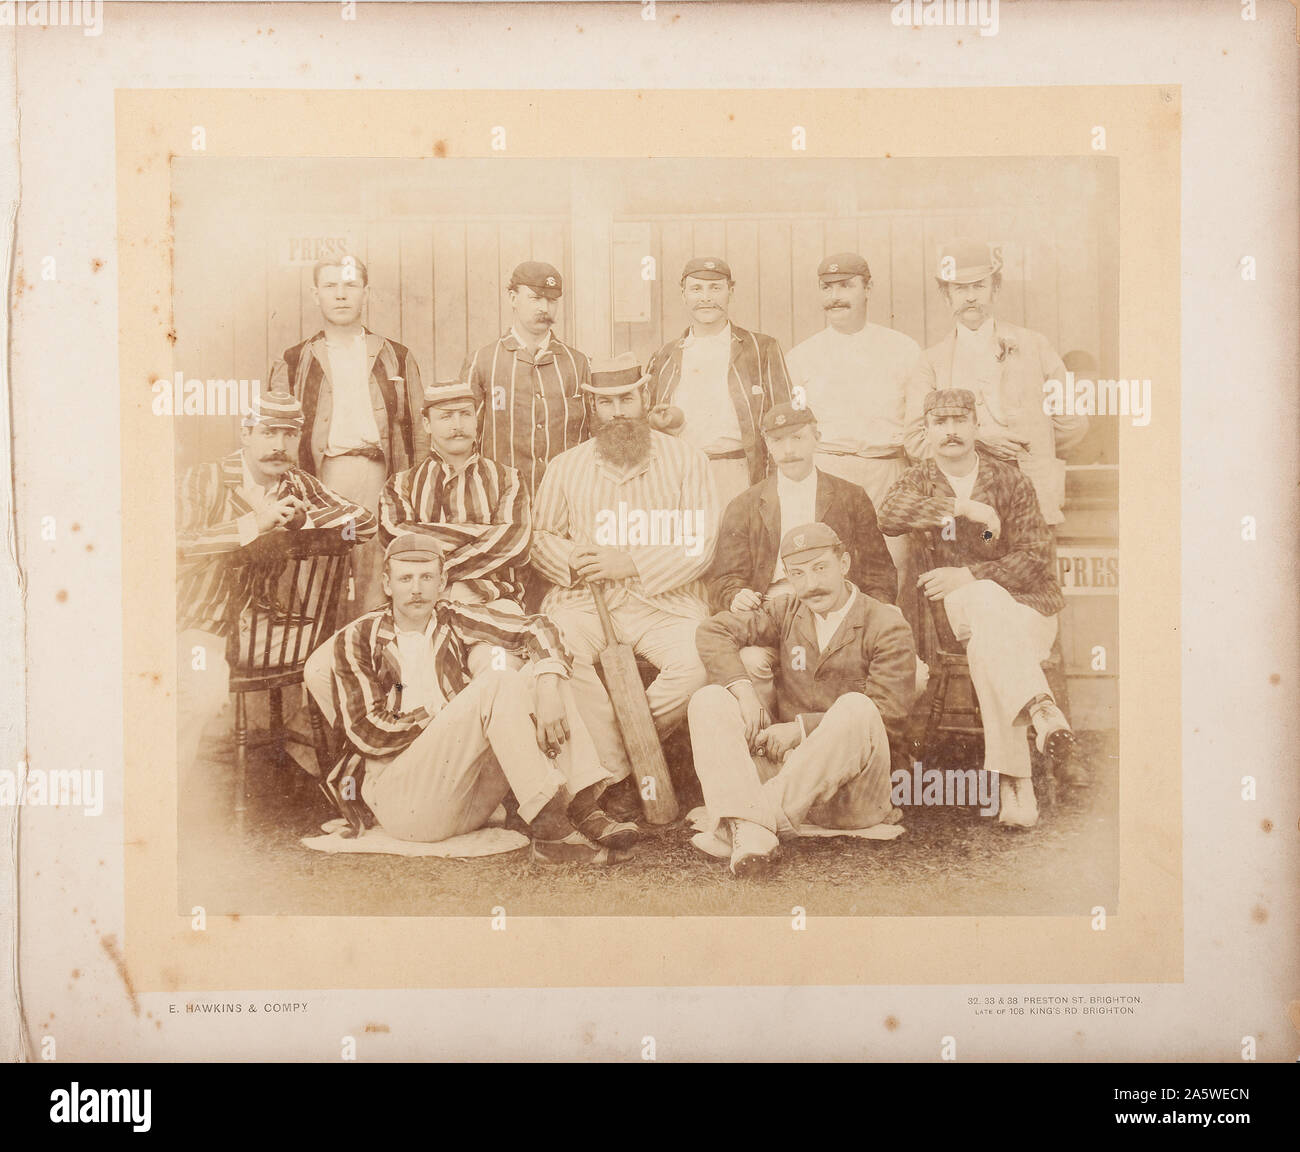 The South Of England Cricket Team 1892. The south of england X1 before their match against the North X1 during the Hastings Cricket Festival. Stock Photo